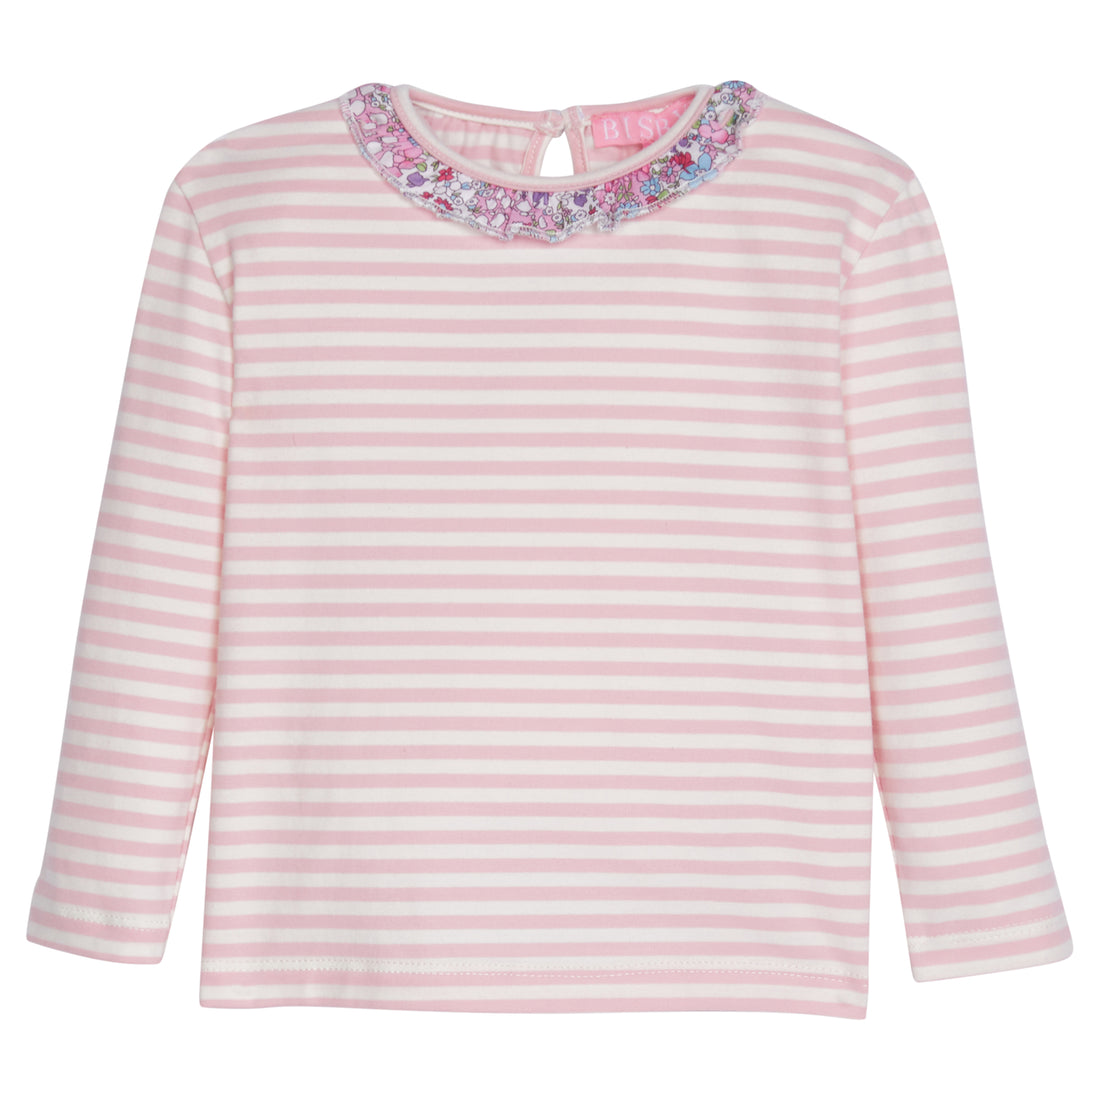 Light Pink and white stripe t-shirt with a cute ruffle around neckline in our Pimlico Pink floral print. The purple and pink in the pimlico floral ties in great with the pink on the super soft t-shirt--BISBY girl